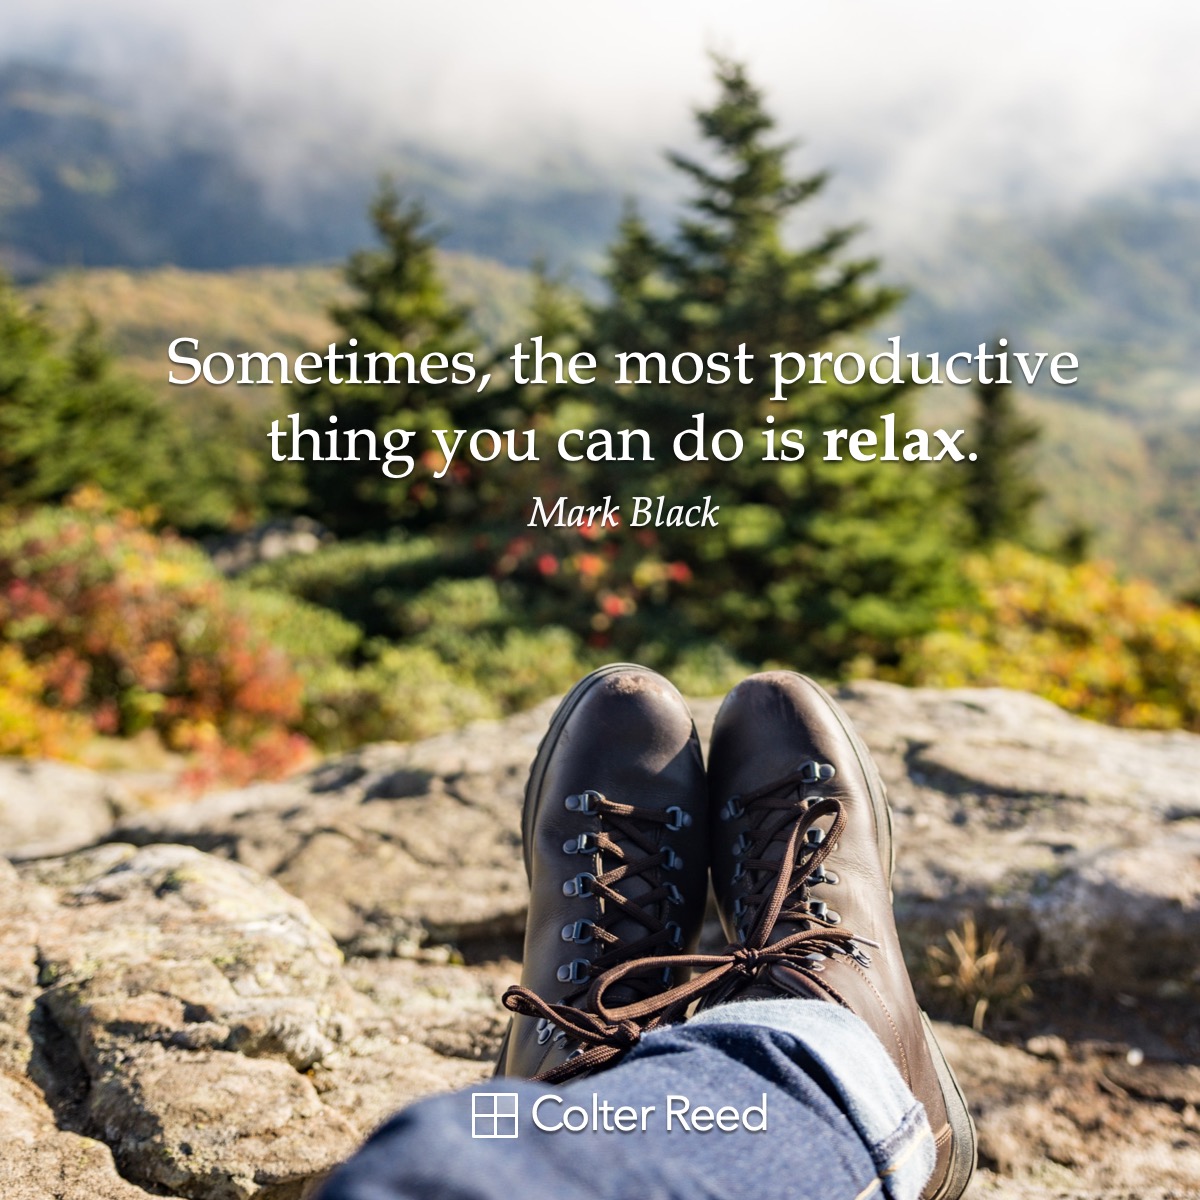 Sometimes, the most productive thing you can do is relax. —Mark Black